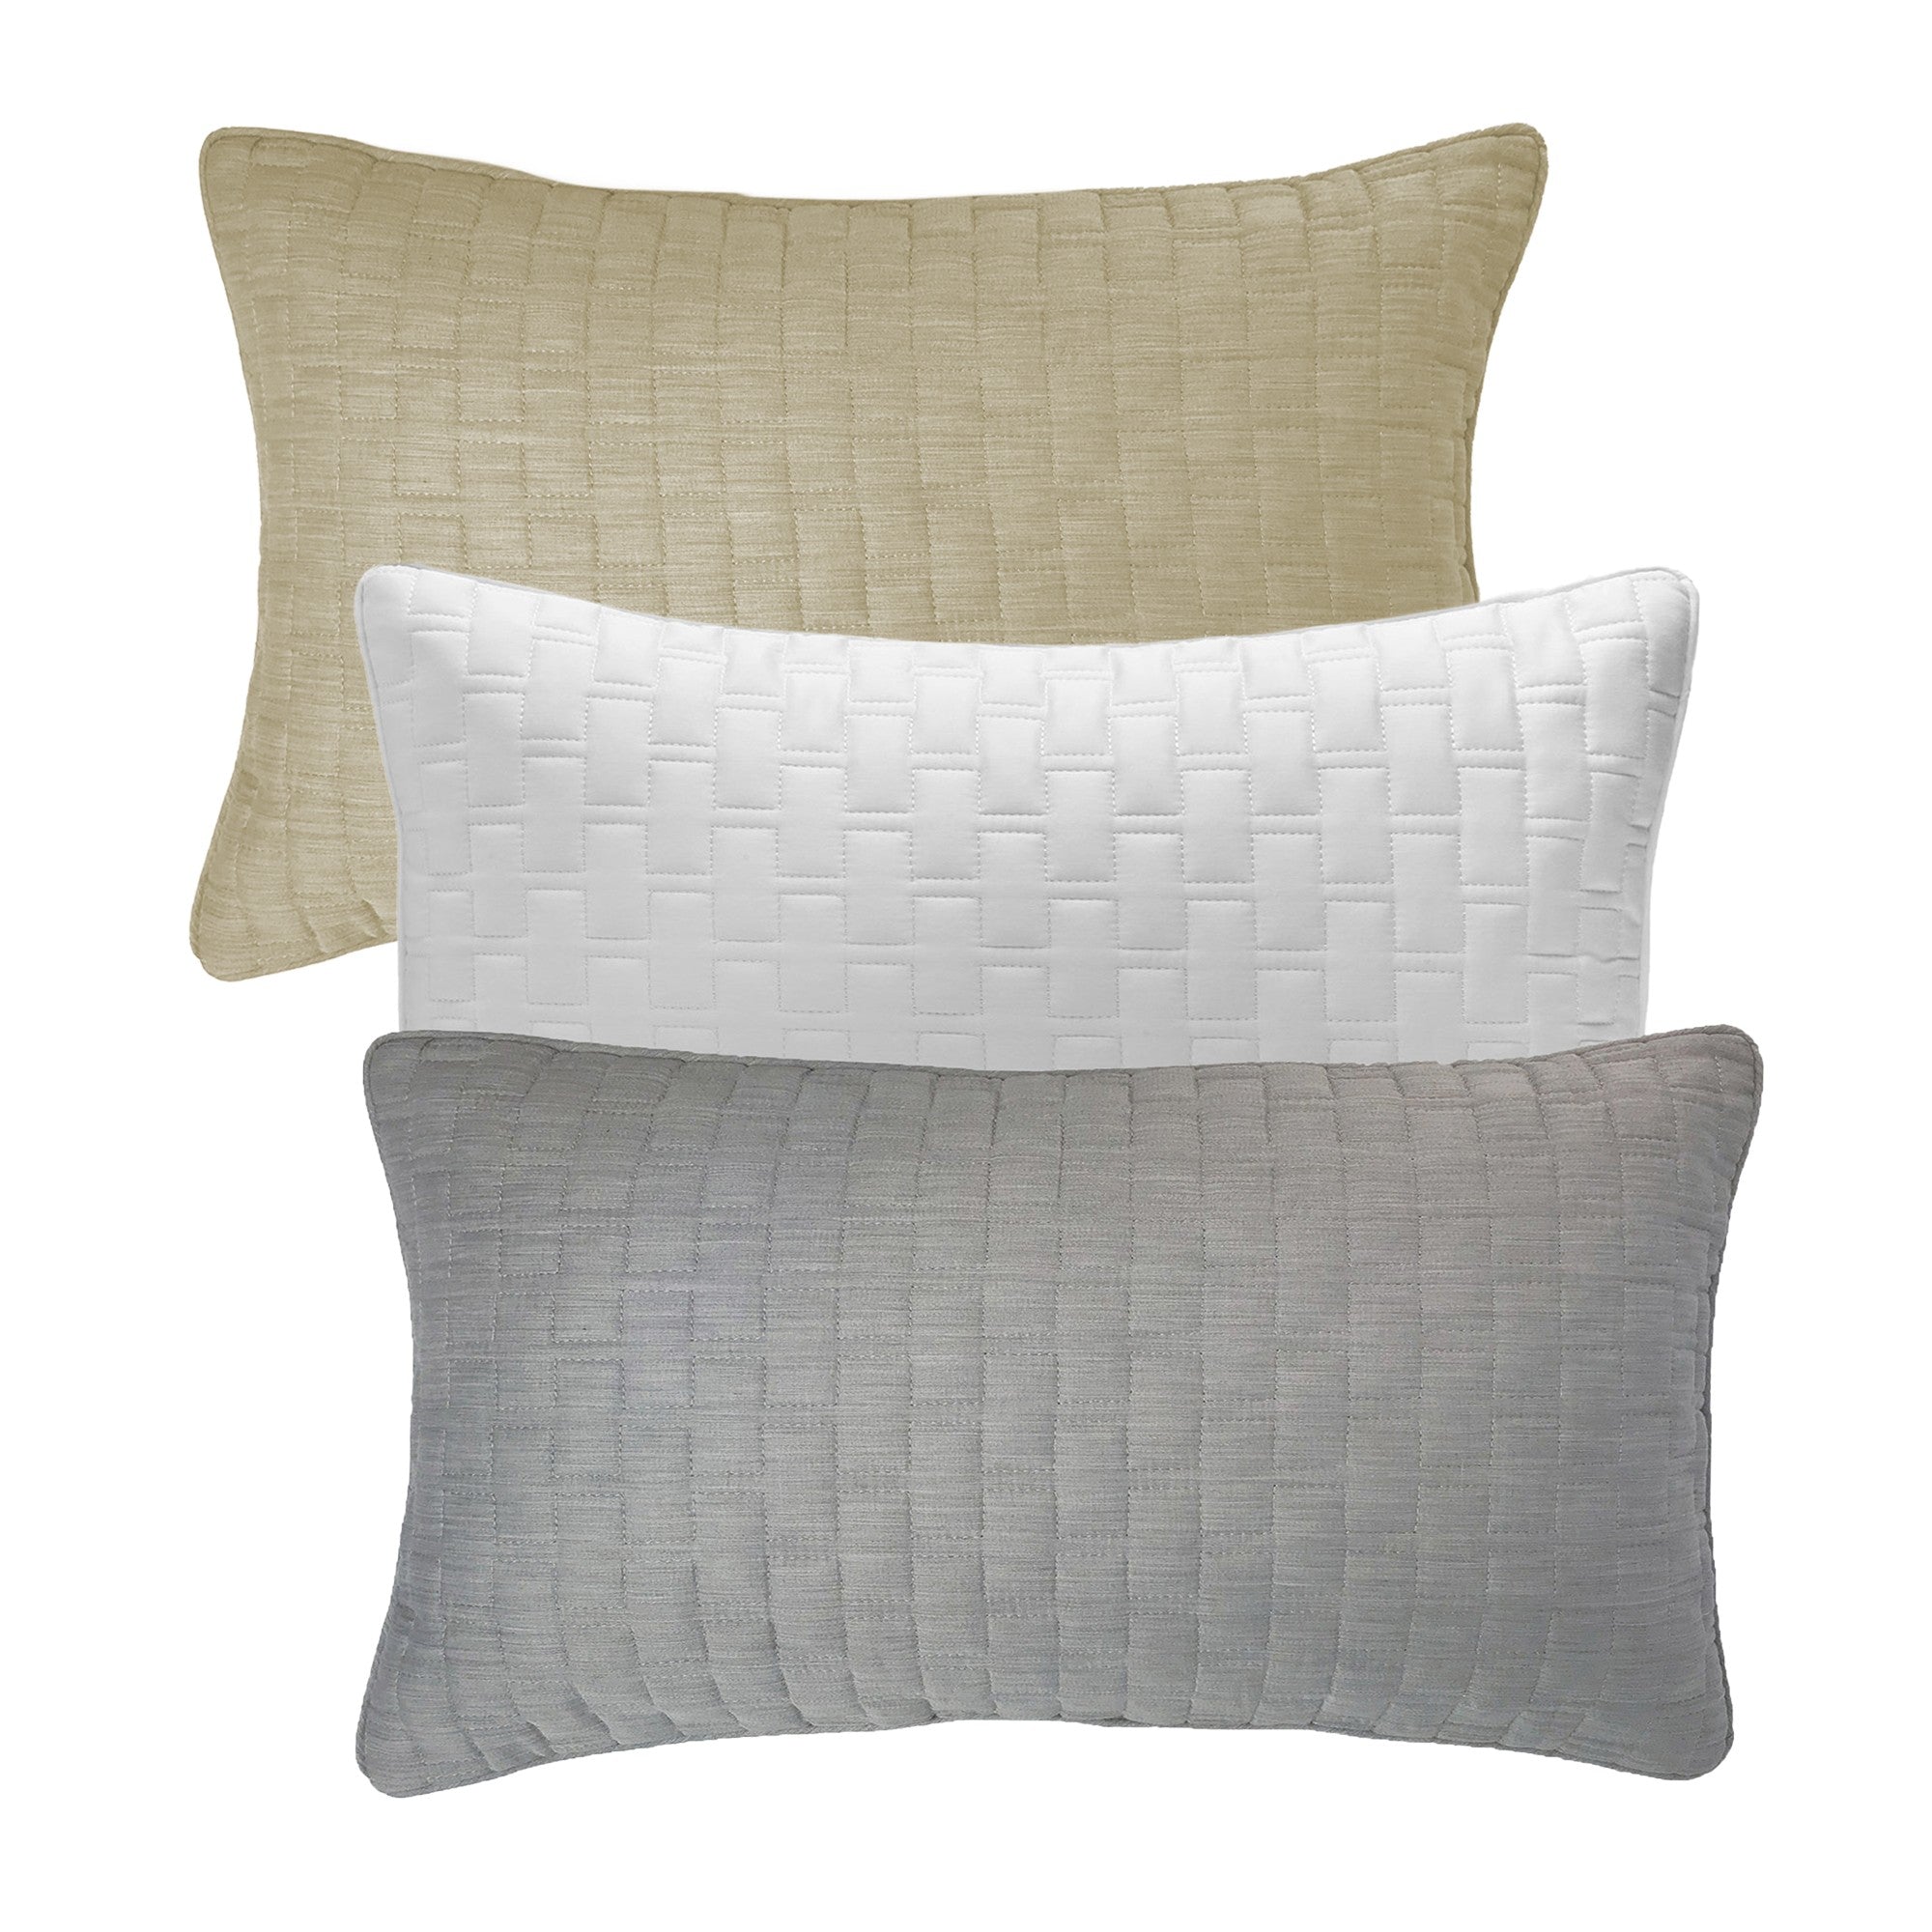 MELANGE Quilted Decorative Pillow - Quilted Brick Pattern For Timeless Design Aesthetic - Smooth Fibers Good For All Types of Skin - Snow